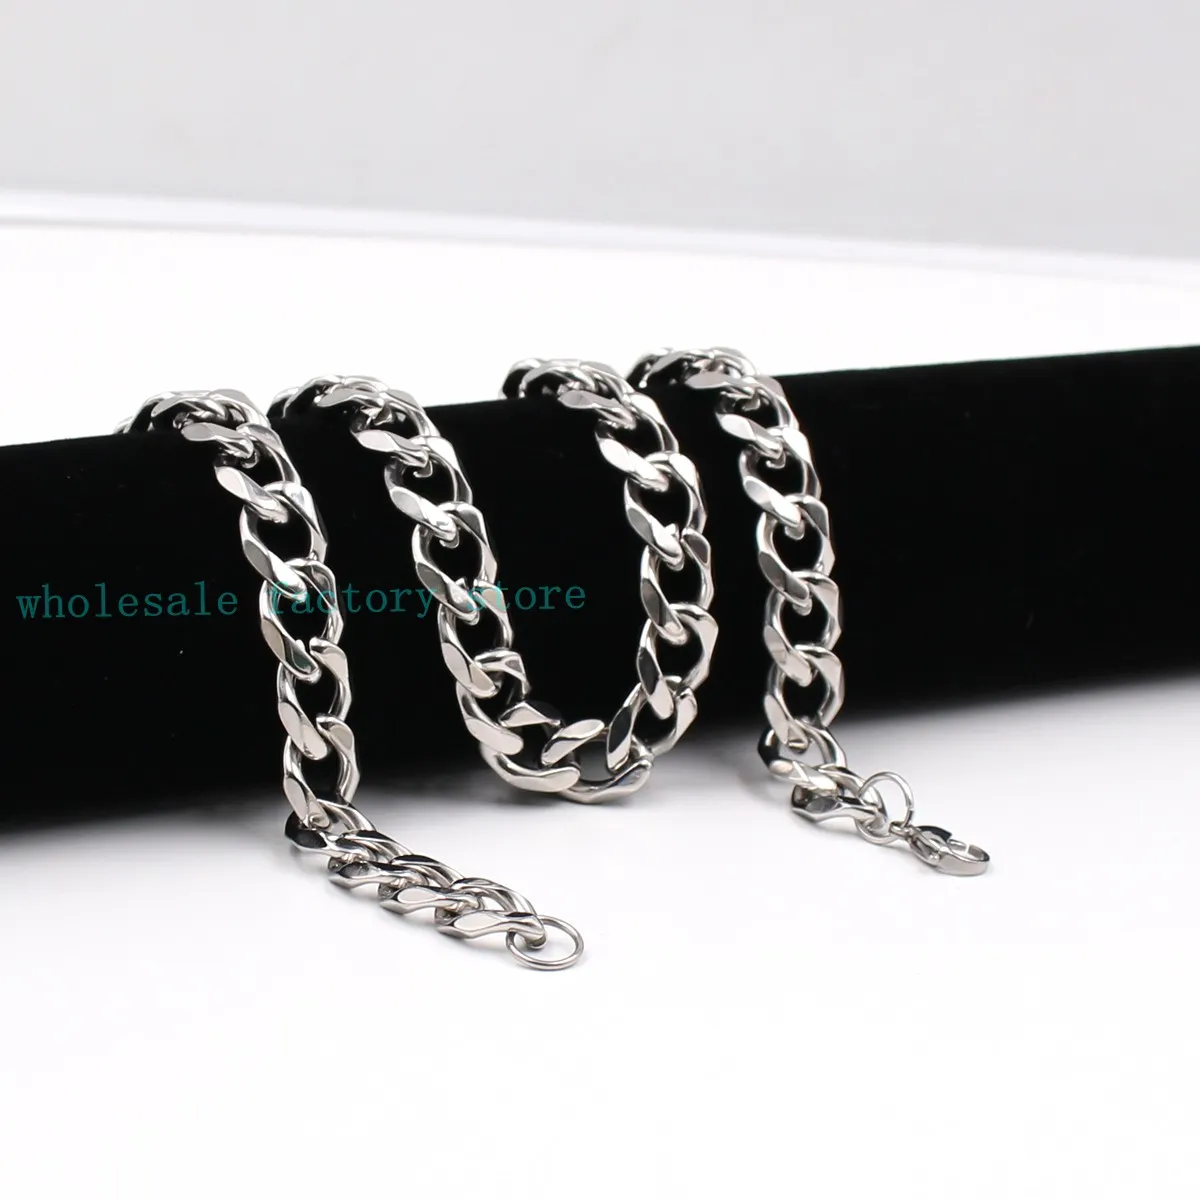 Silver Lobster Clasp High Polished Stainless steel 15mm Cuban Curb Link Chain 24'' Necklace + 8.66" Bracelet Set